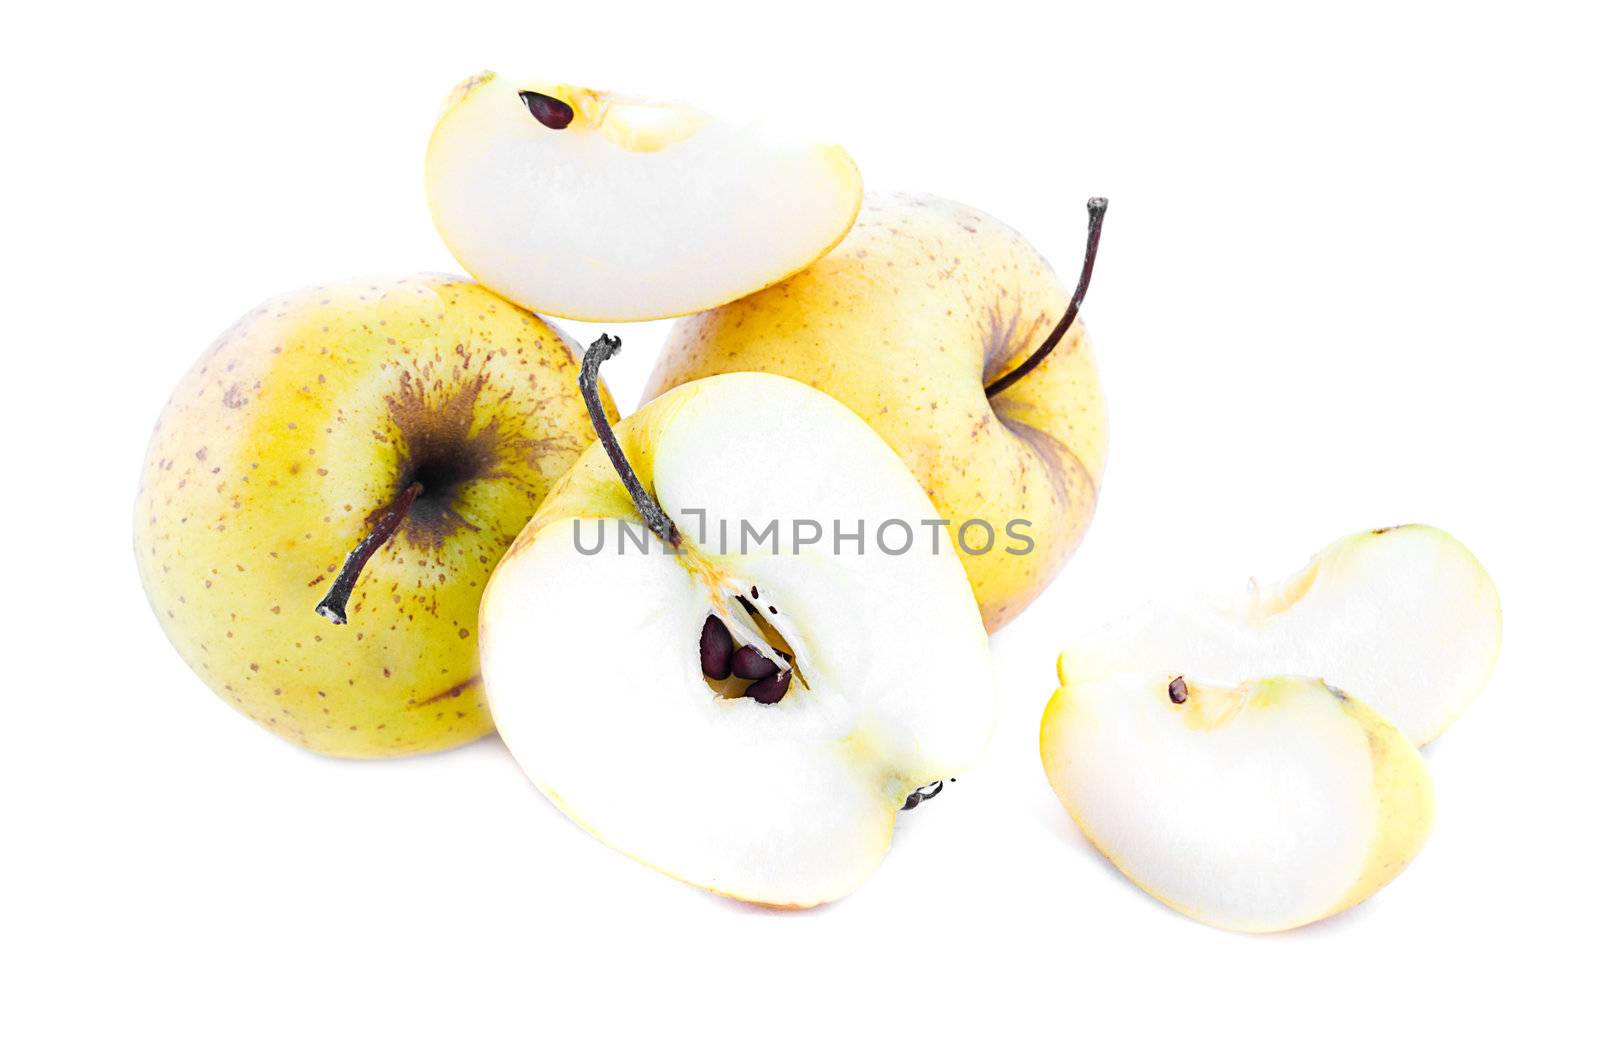 Yellow apples and its slices by Angel_a